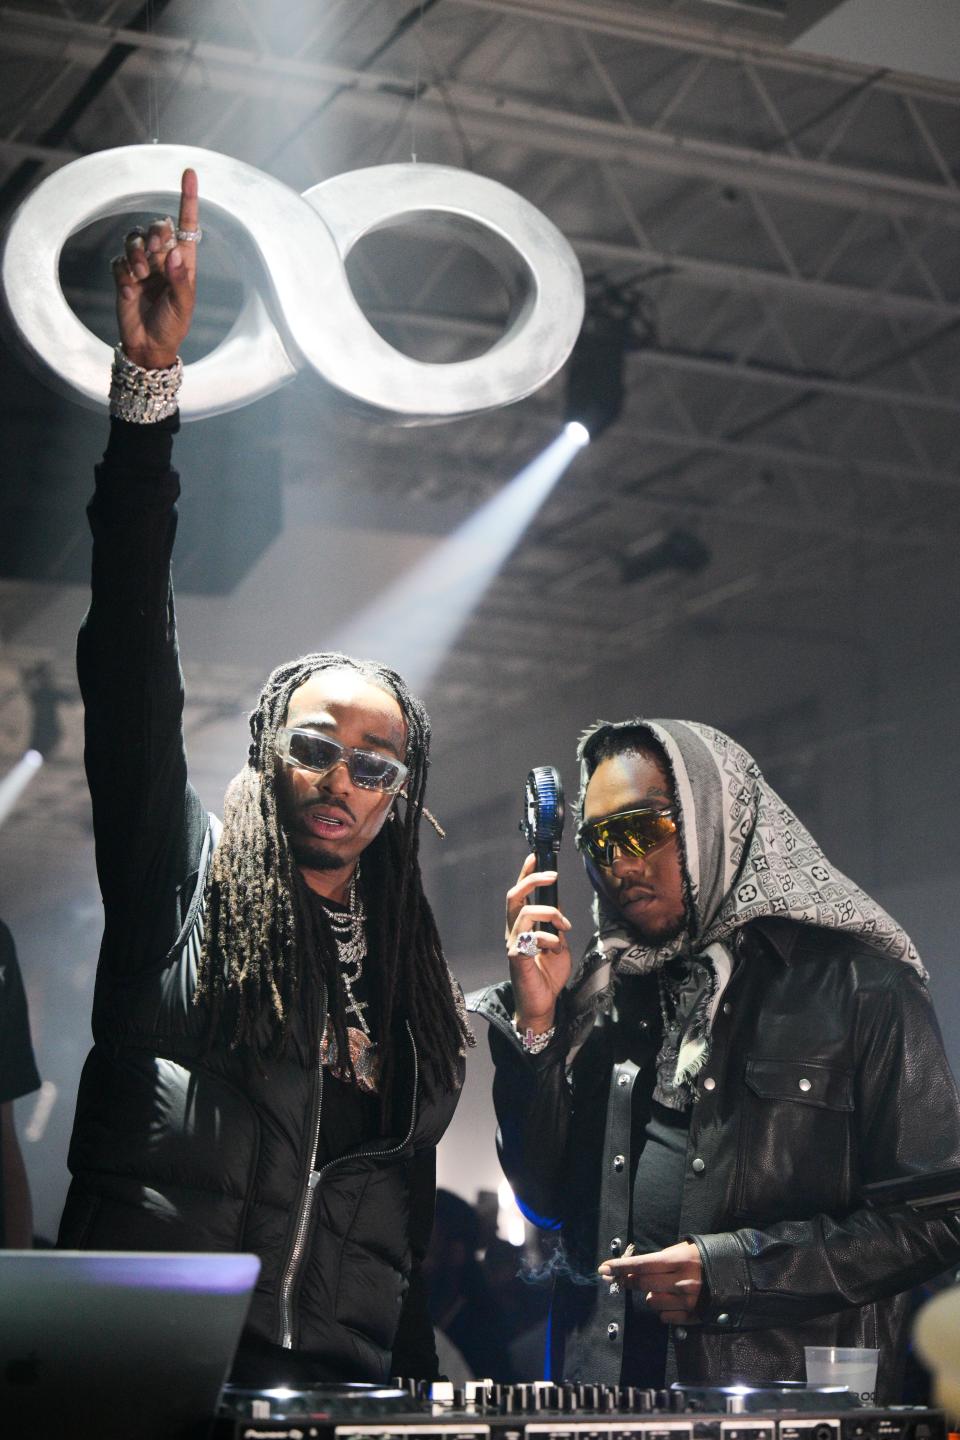 Quavo and Takeoff attend "Only Built for Infinity Links" album listening party on October 4, 2022